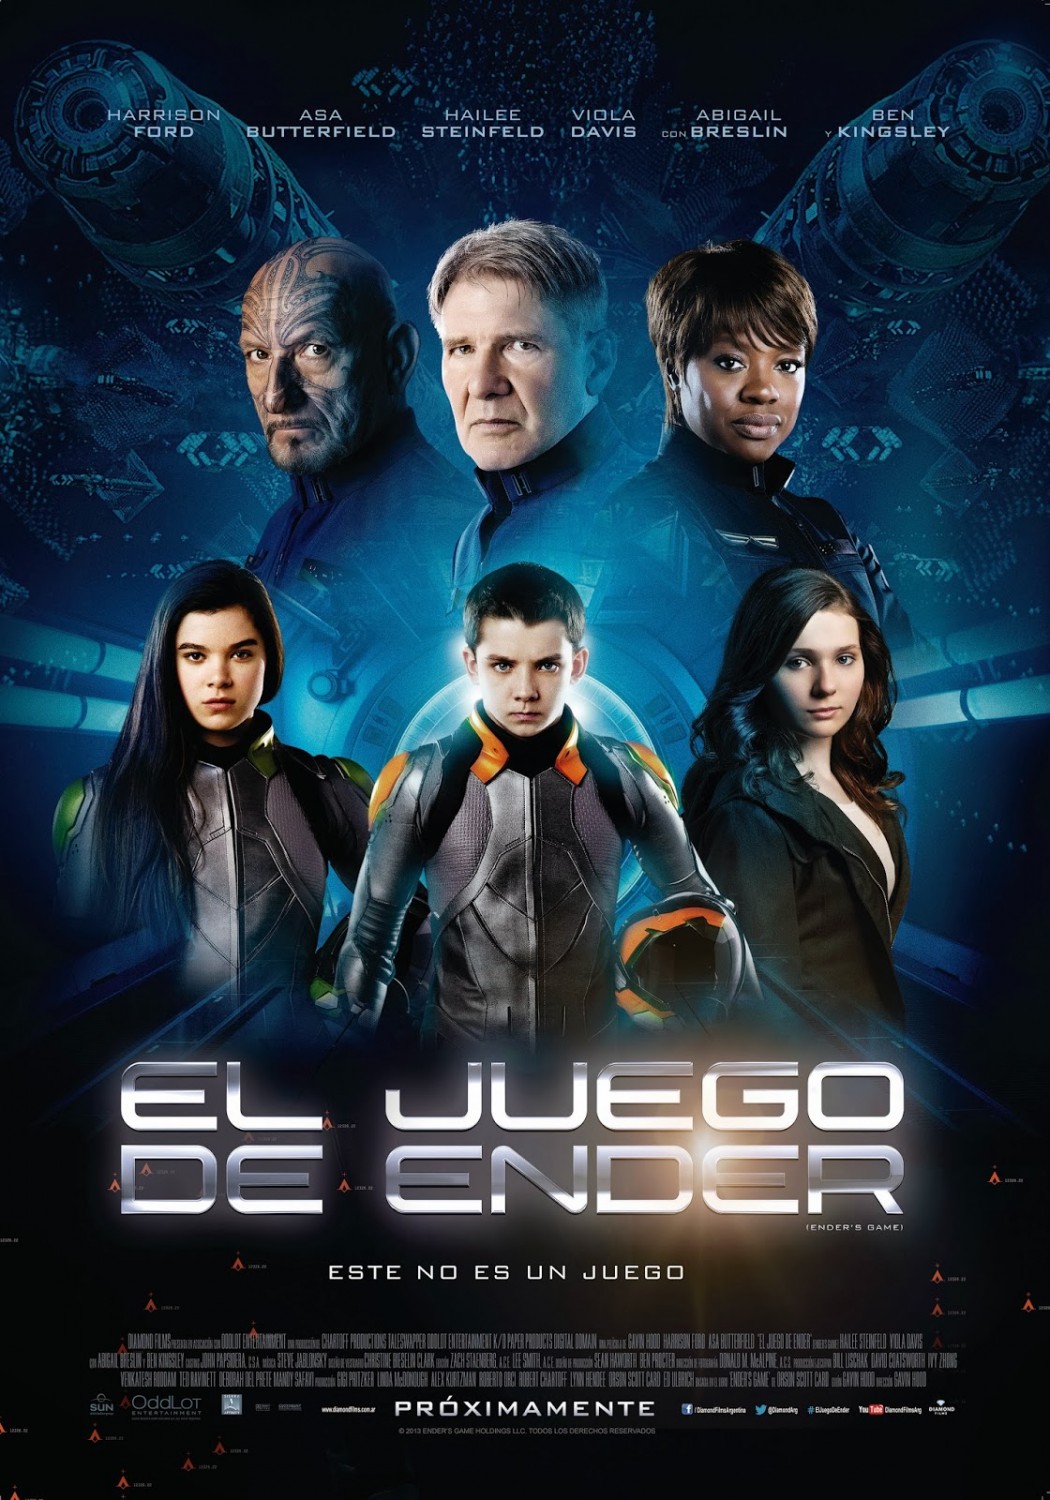 Ender's Game (#22 of 26): Extra Large Movie Poster Image - IMP Awards